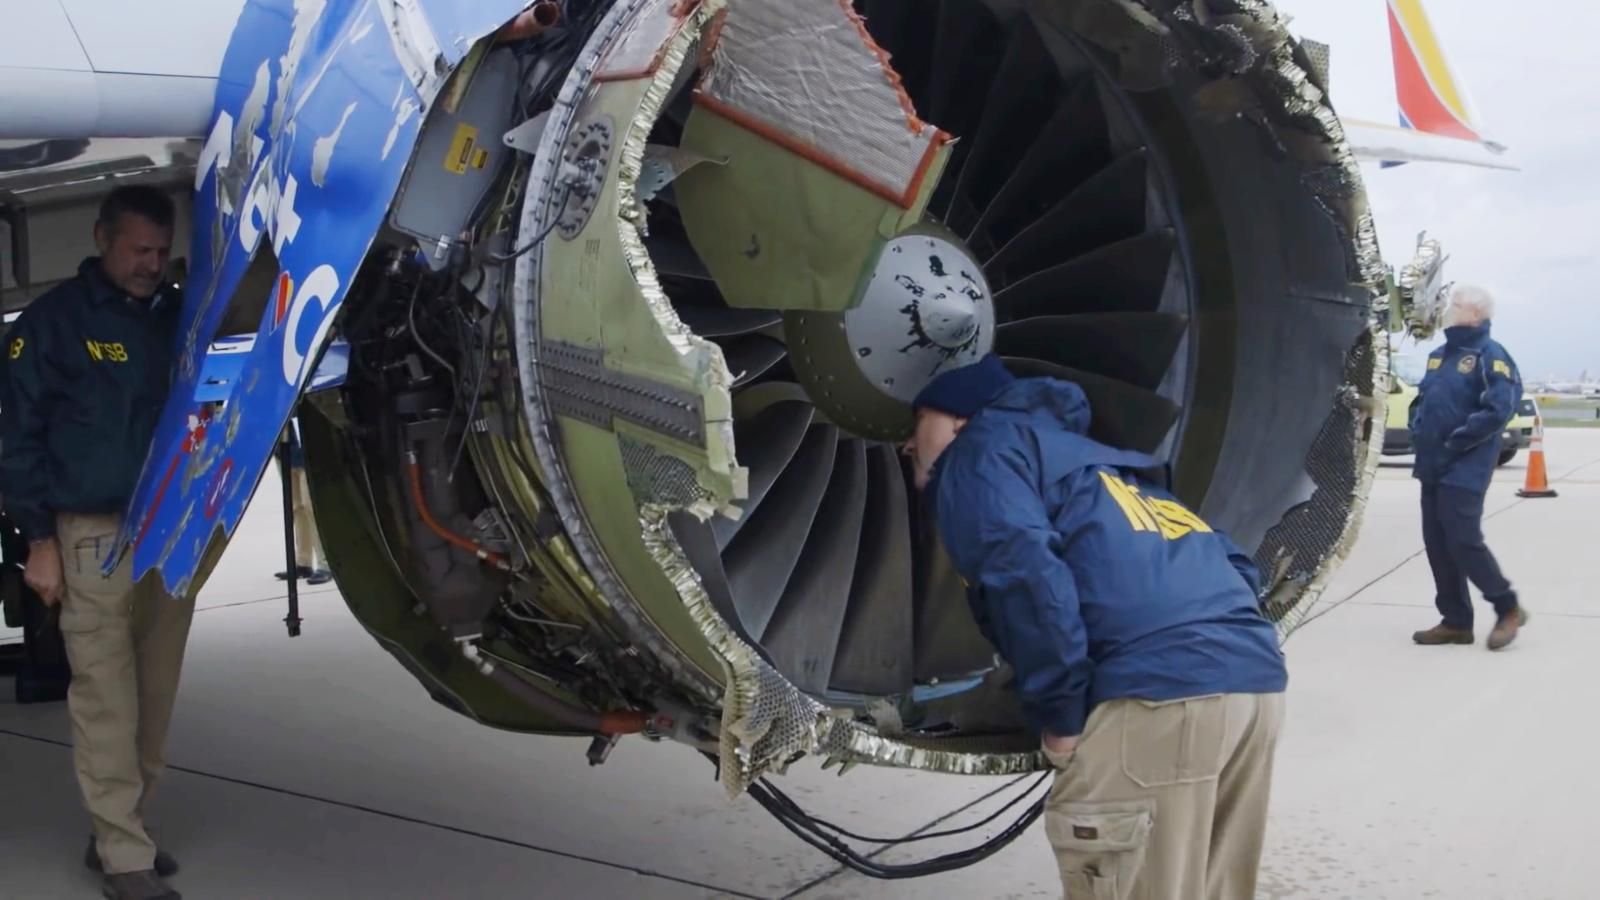 NTSB staff inspect the engine of a Southwest plane on the runway